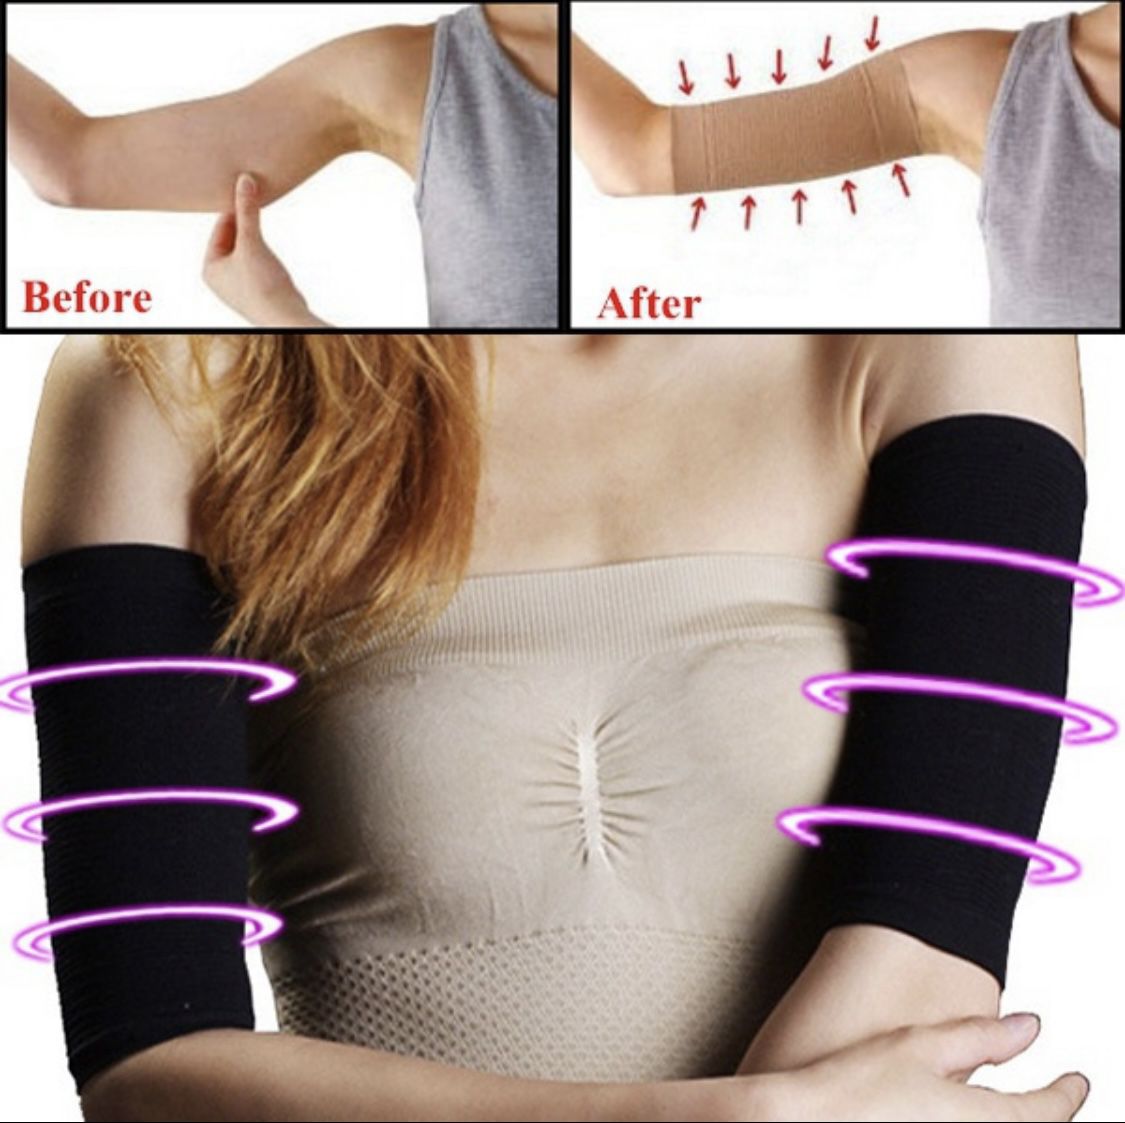 New BLACK Beauty Women Shaper Weight Loss Thin Legs Thin Arm Calorie Off Fat Buster Slimmer Wrap Belt Women and USB Rechargable EMS Trainer fitness